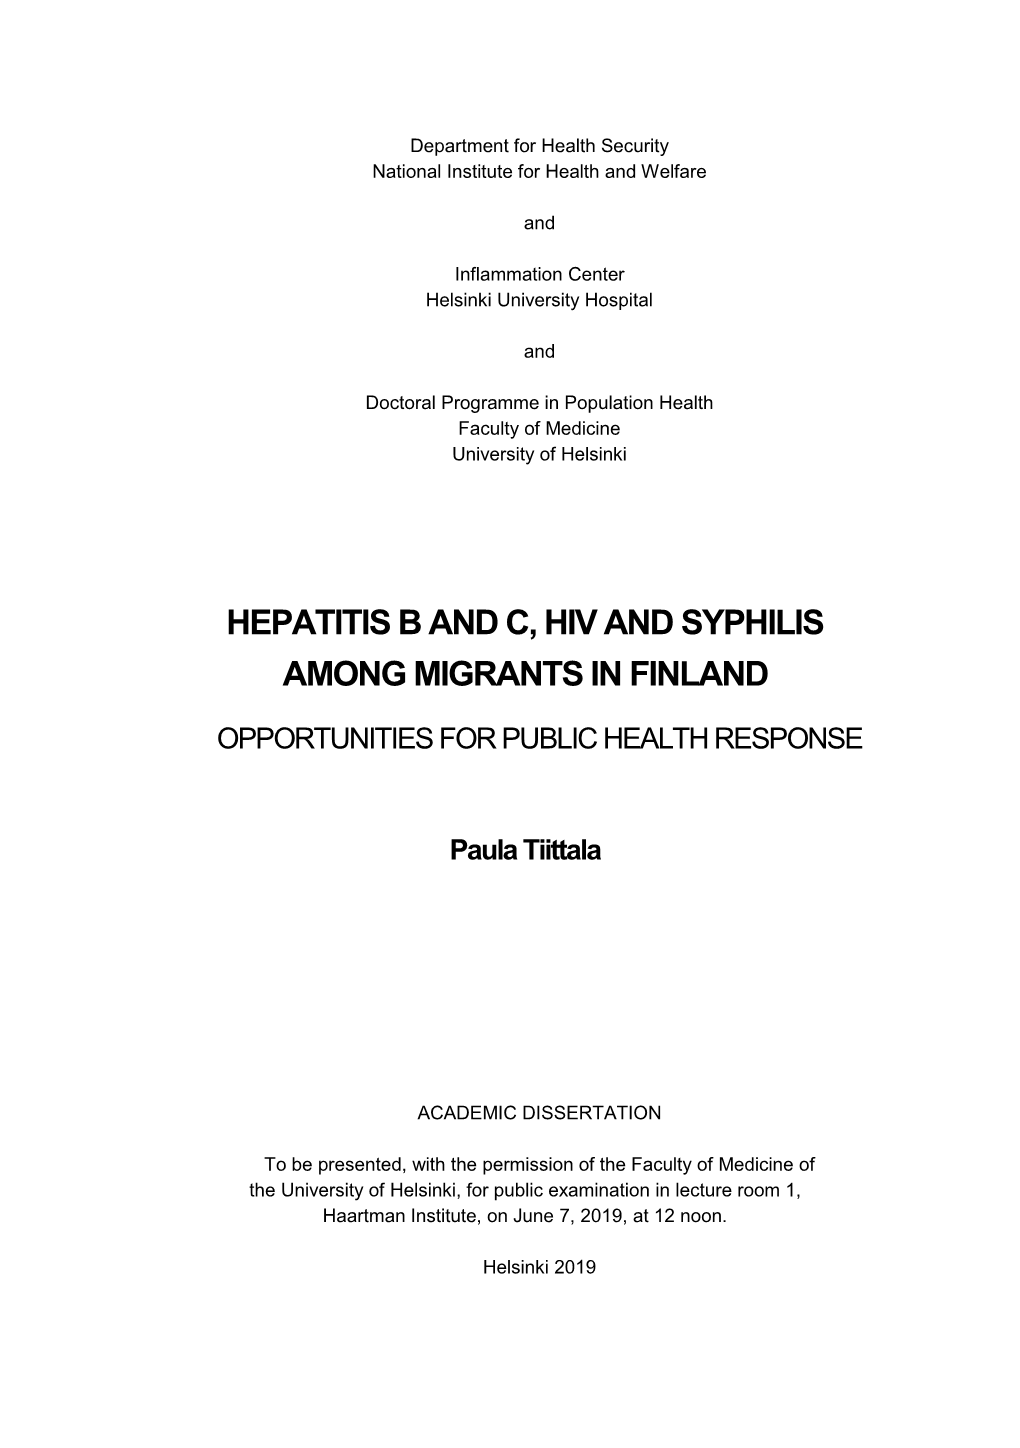 Hepatitis B and C, Hiv and Syphilis Among Migrants in Finland